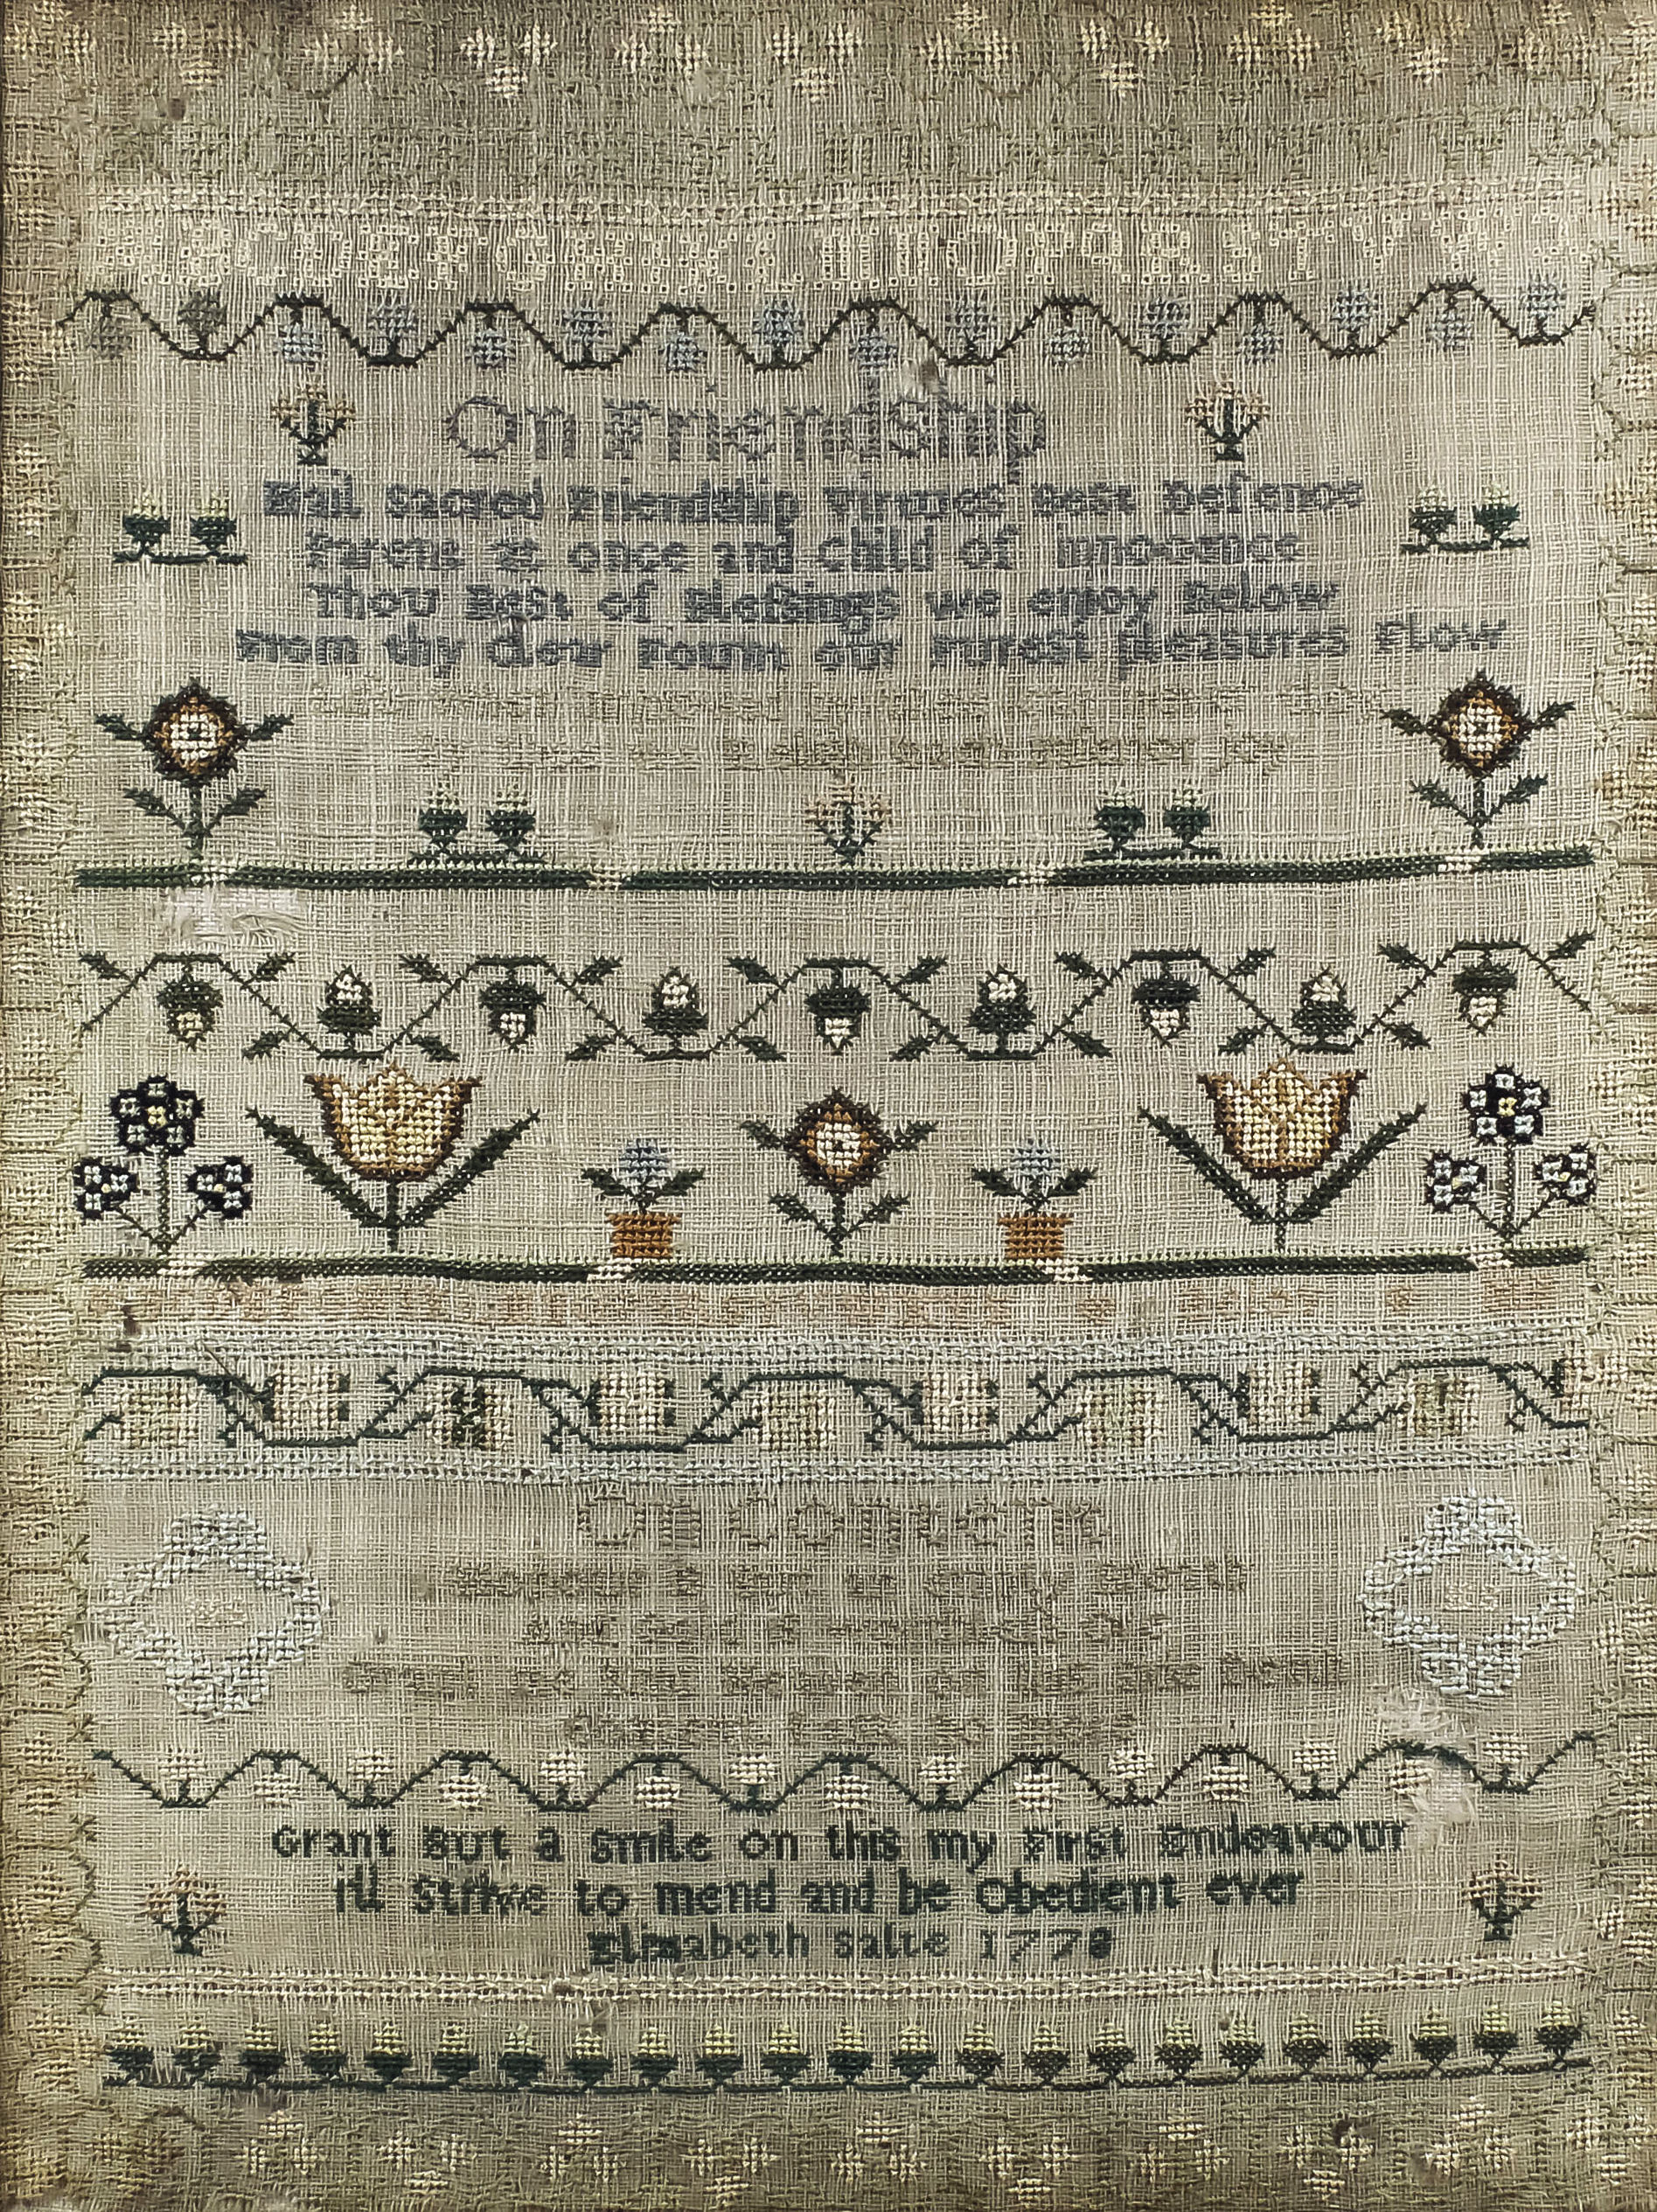 A George III sampler worked in coloured silks by Elizabeth Salte 1778, with bands of foliage,